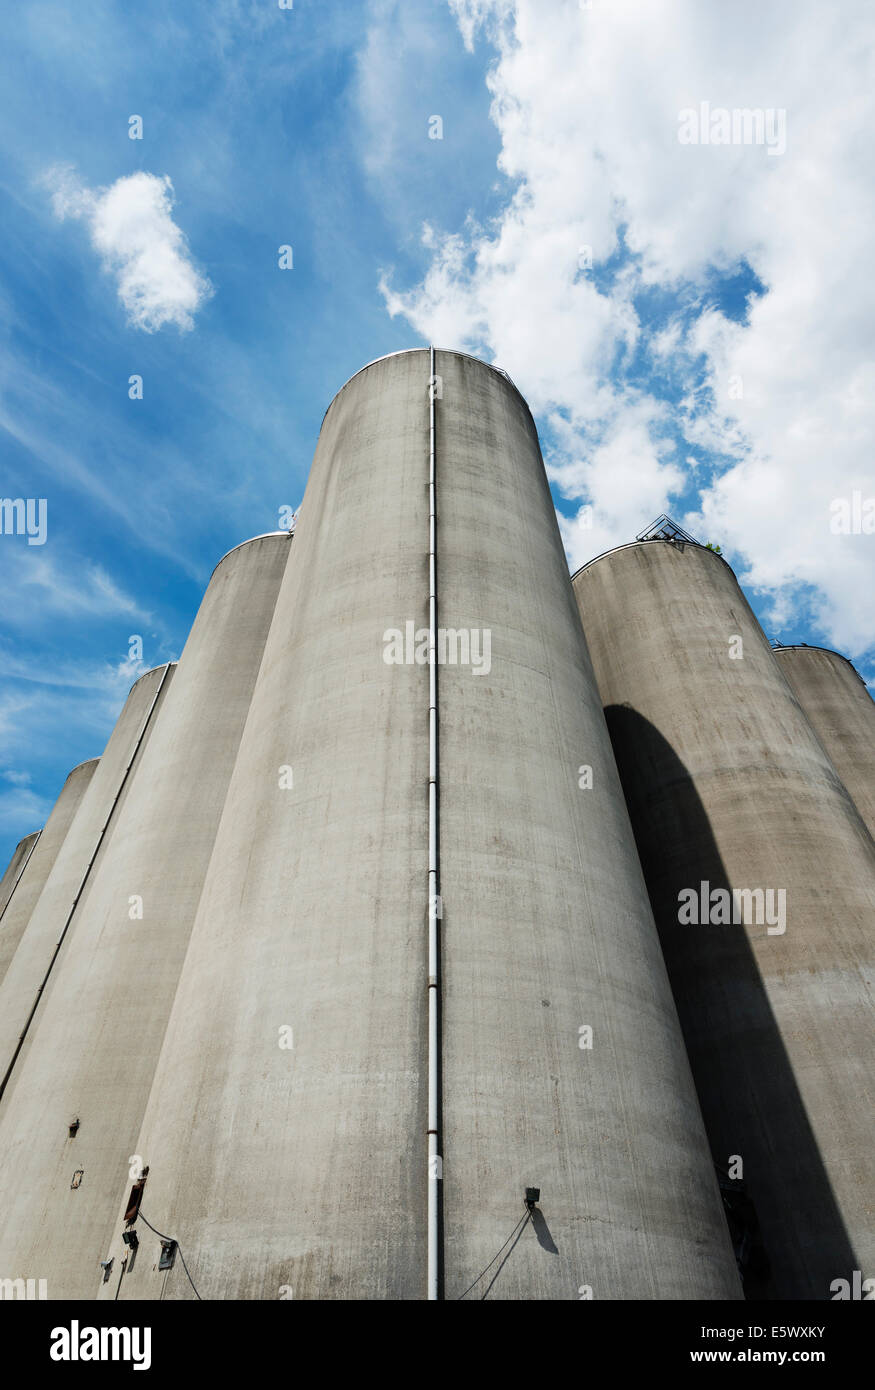 Disused silos for storing agricultural food, Veghel, Noord-Brabant , Netherlands Stock Photo